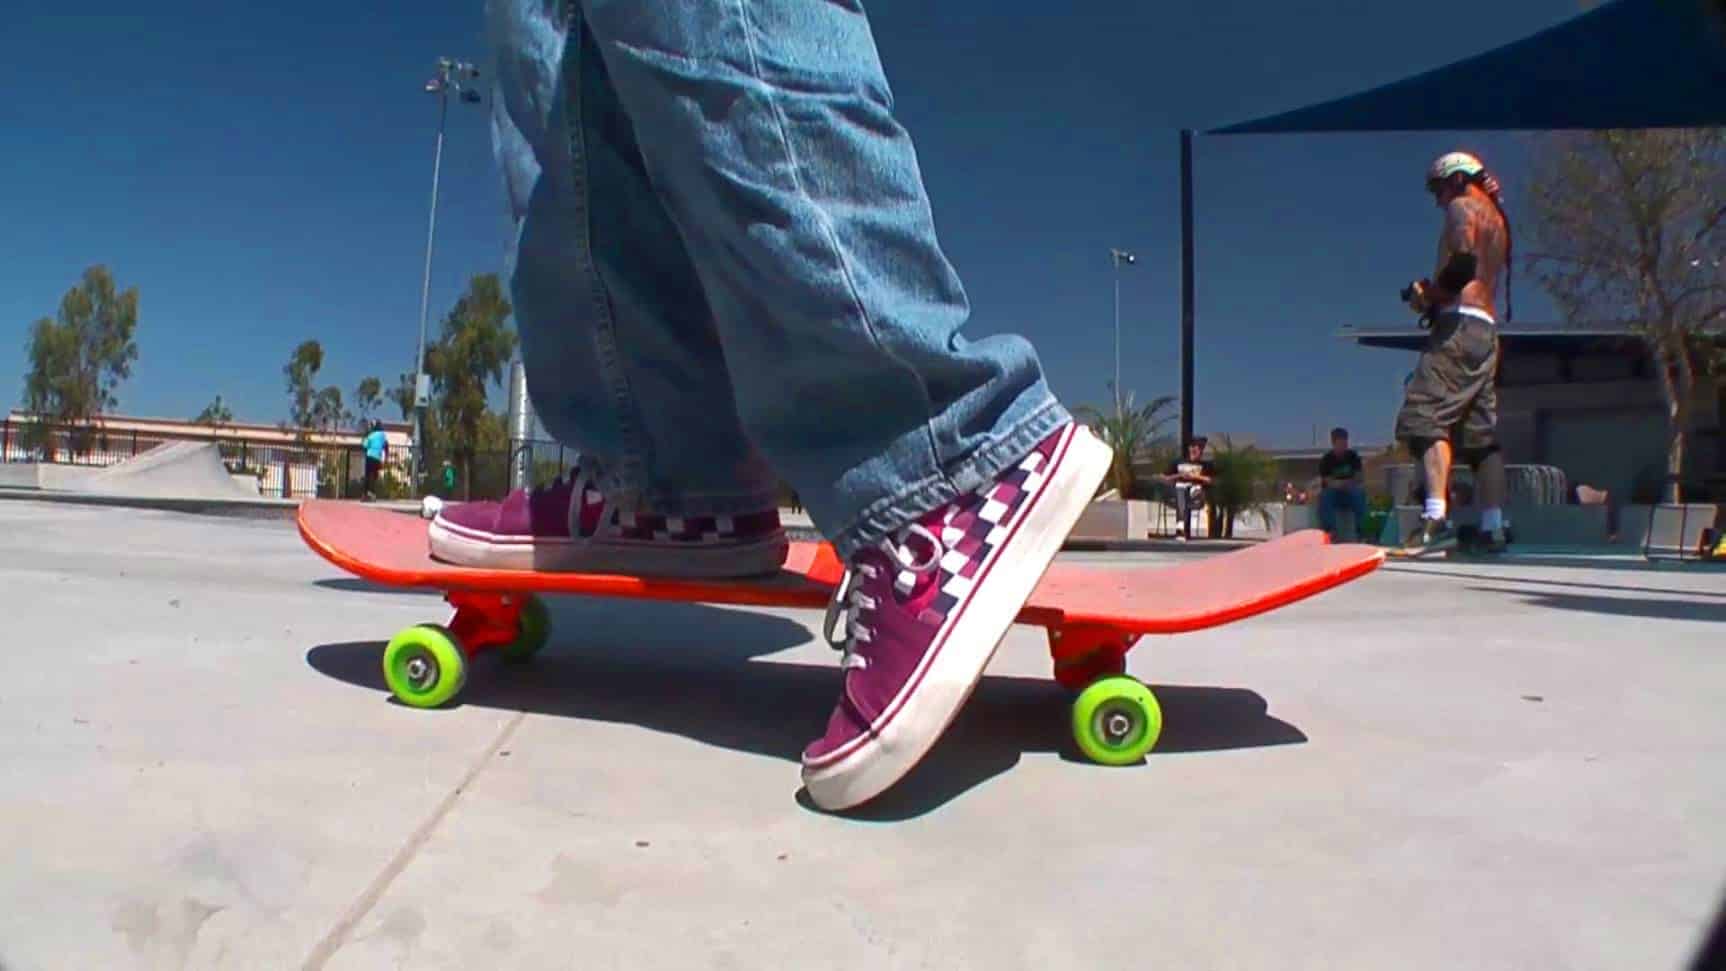 Chaussure skate, le style à adopter